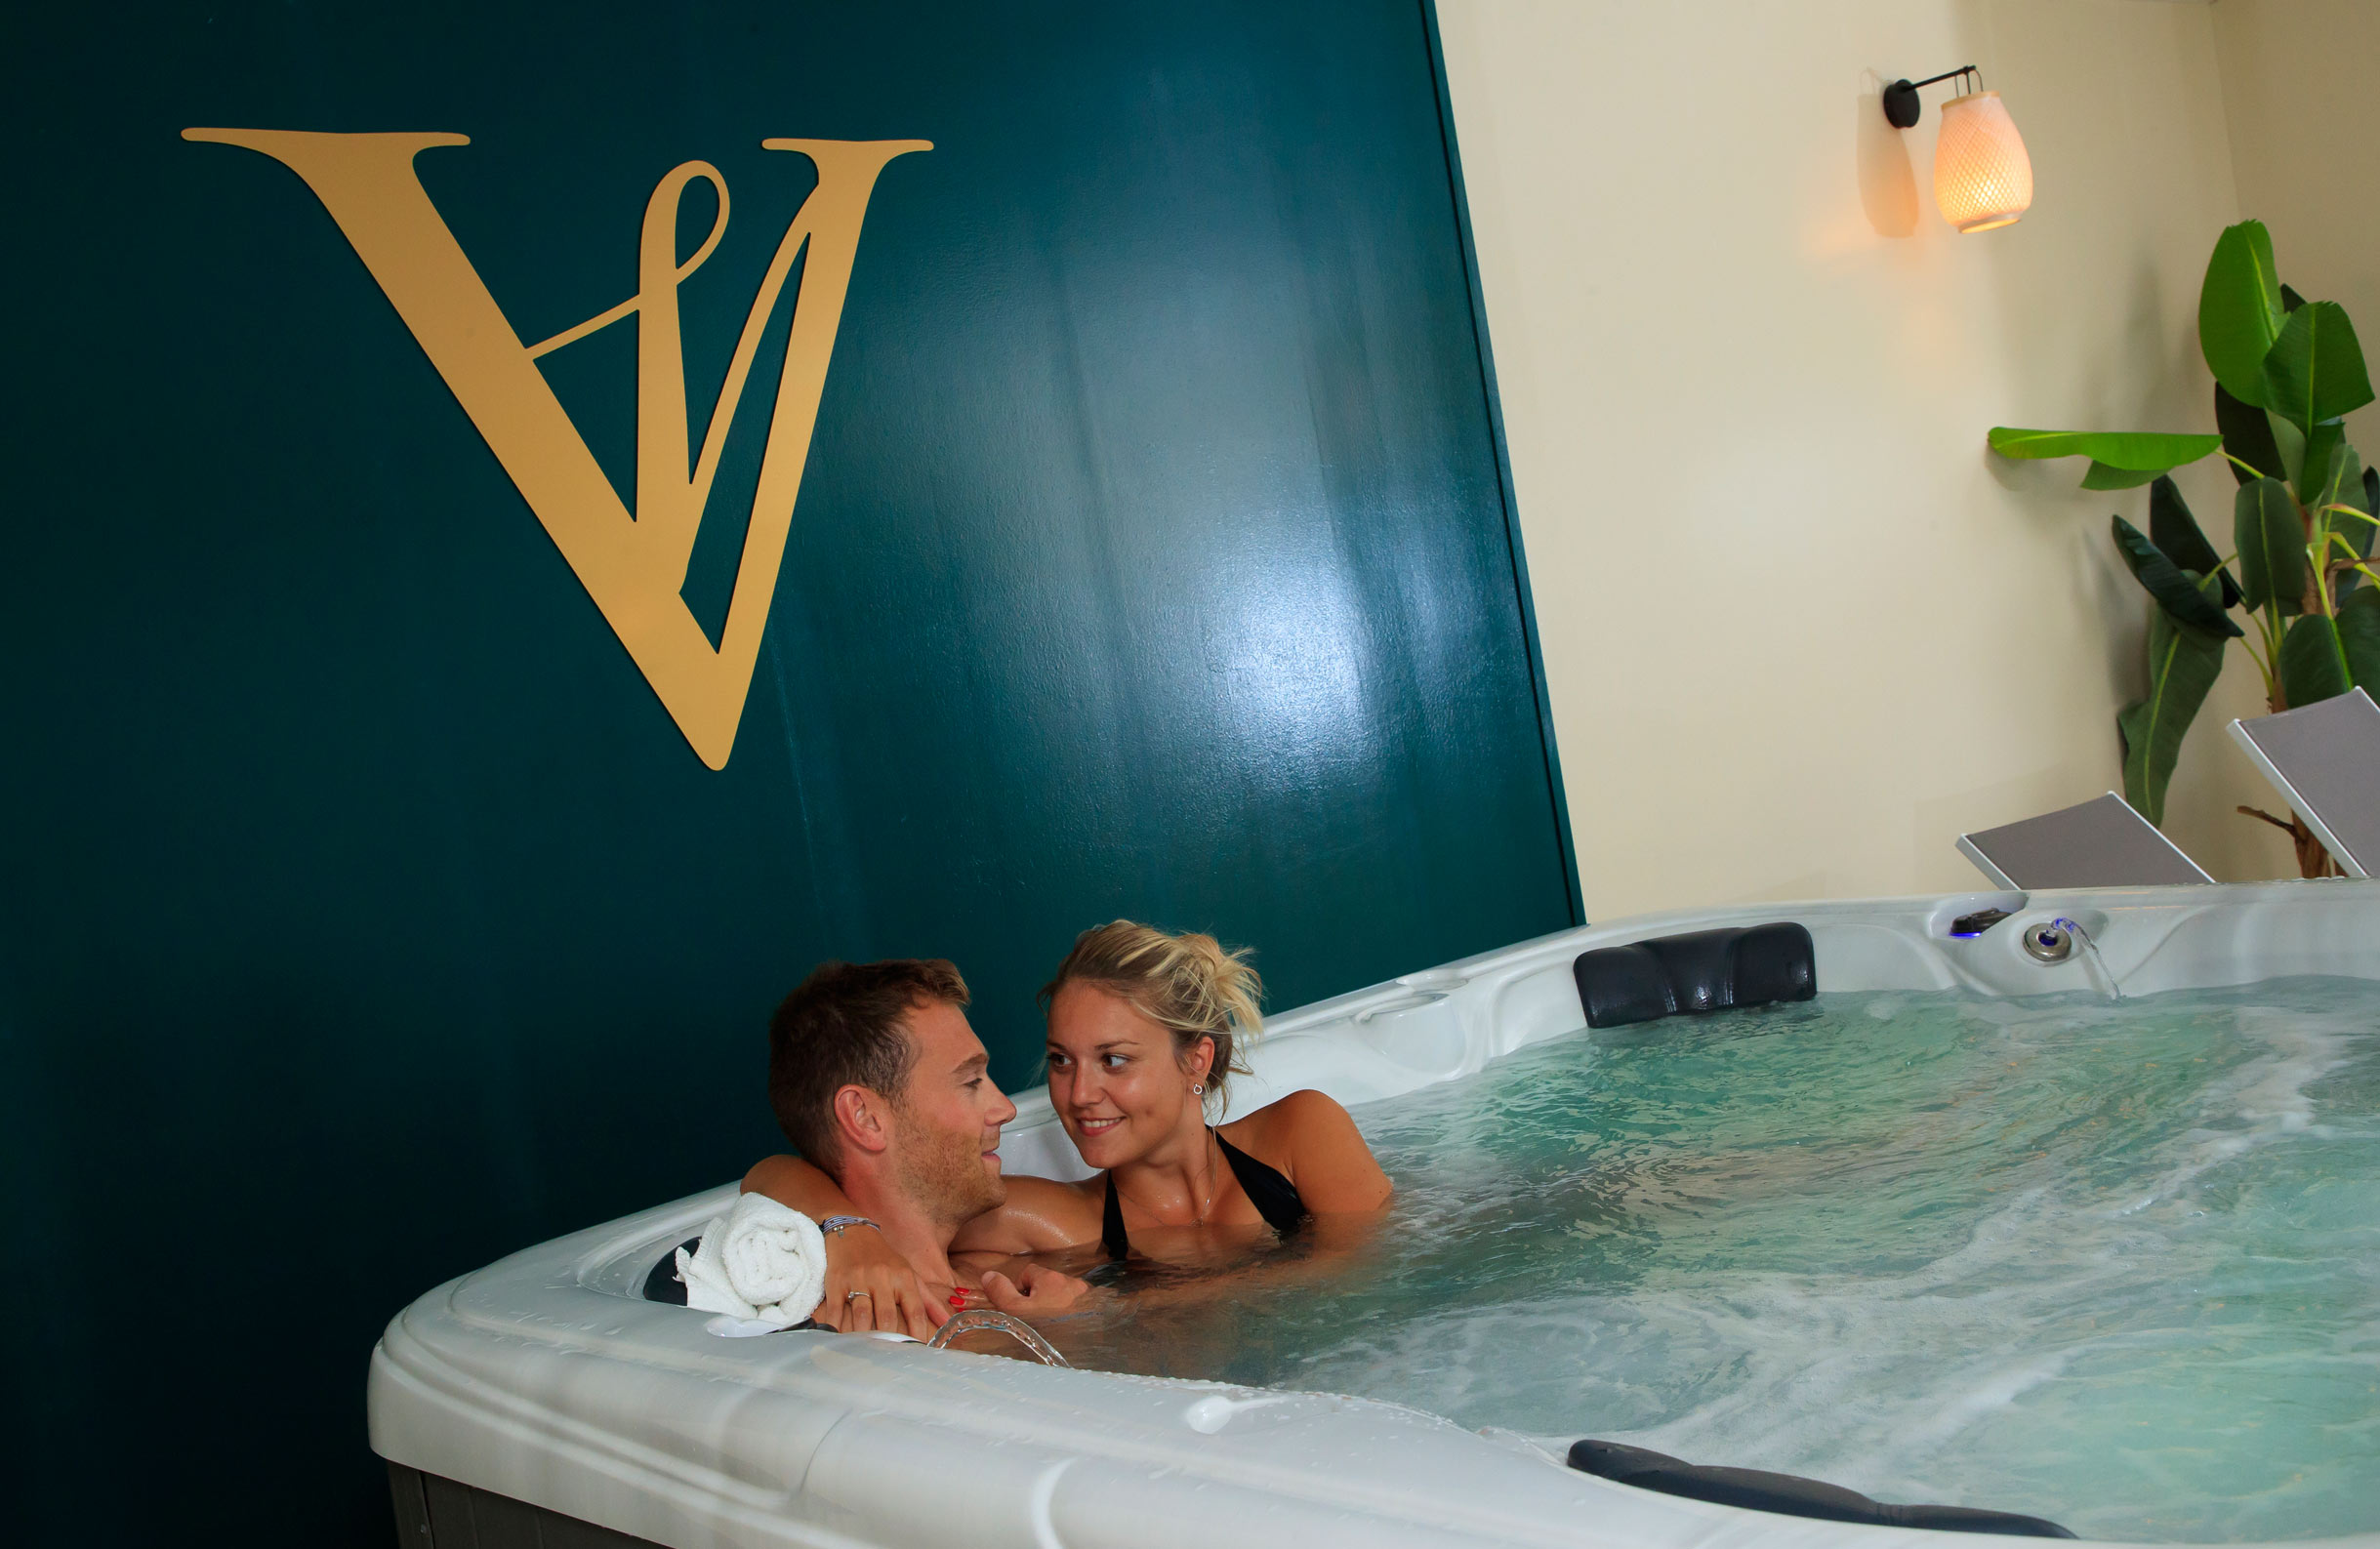 The hot tub at Villa Varentia boutique B&B in Northern France is the perfect place to press pause and get the much needed zen factor